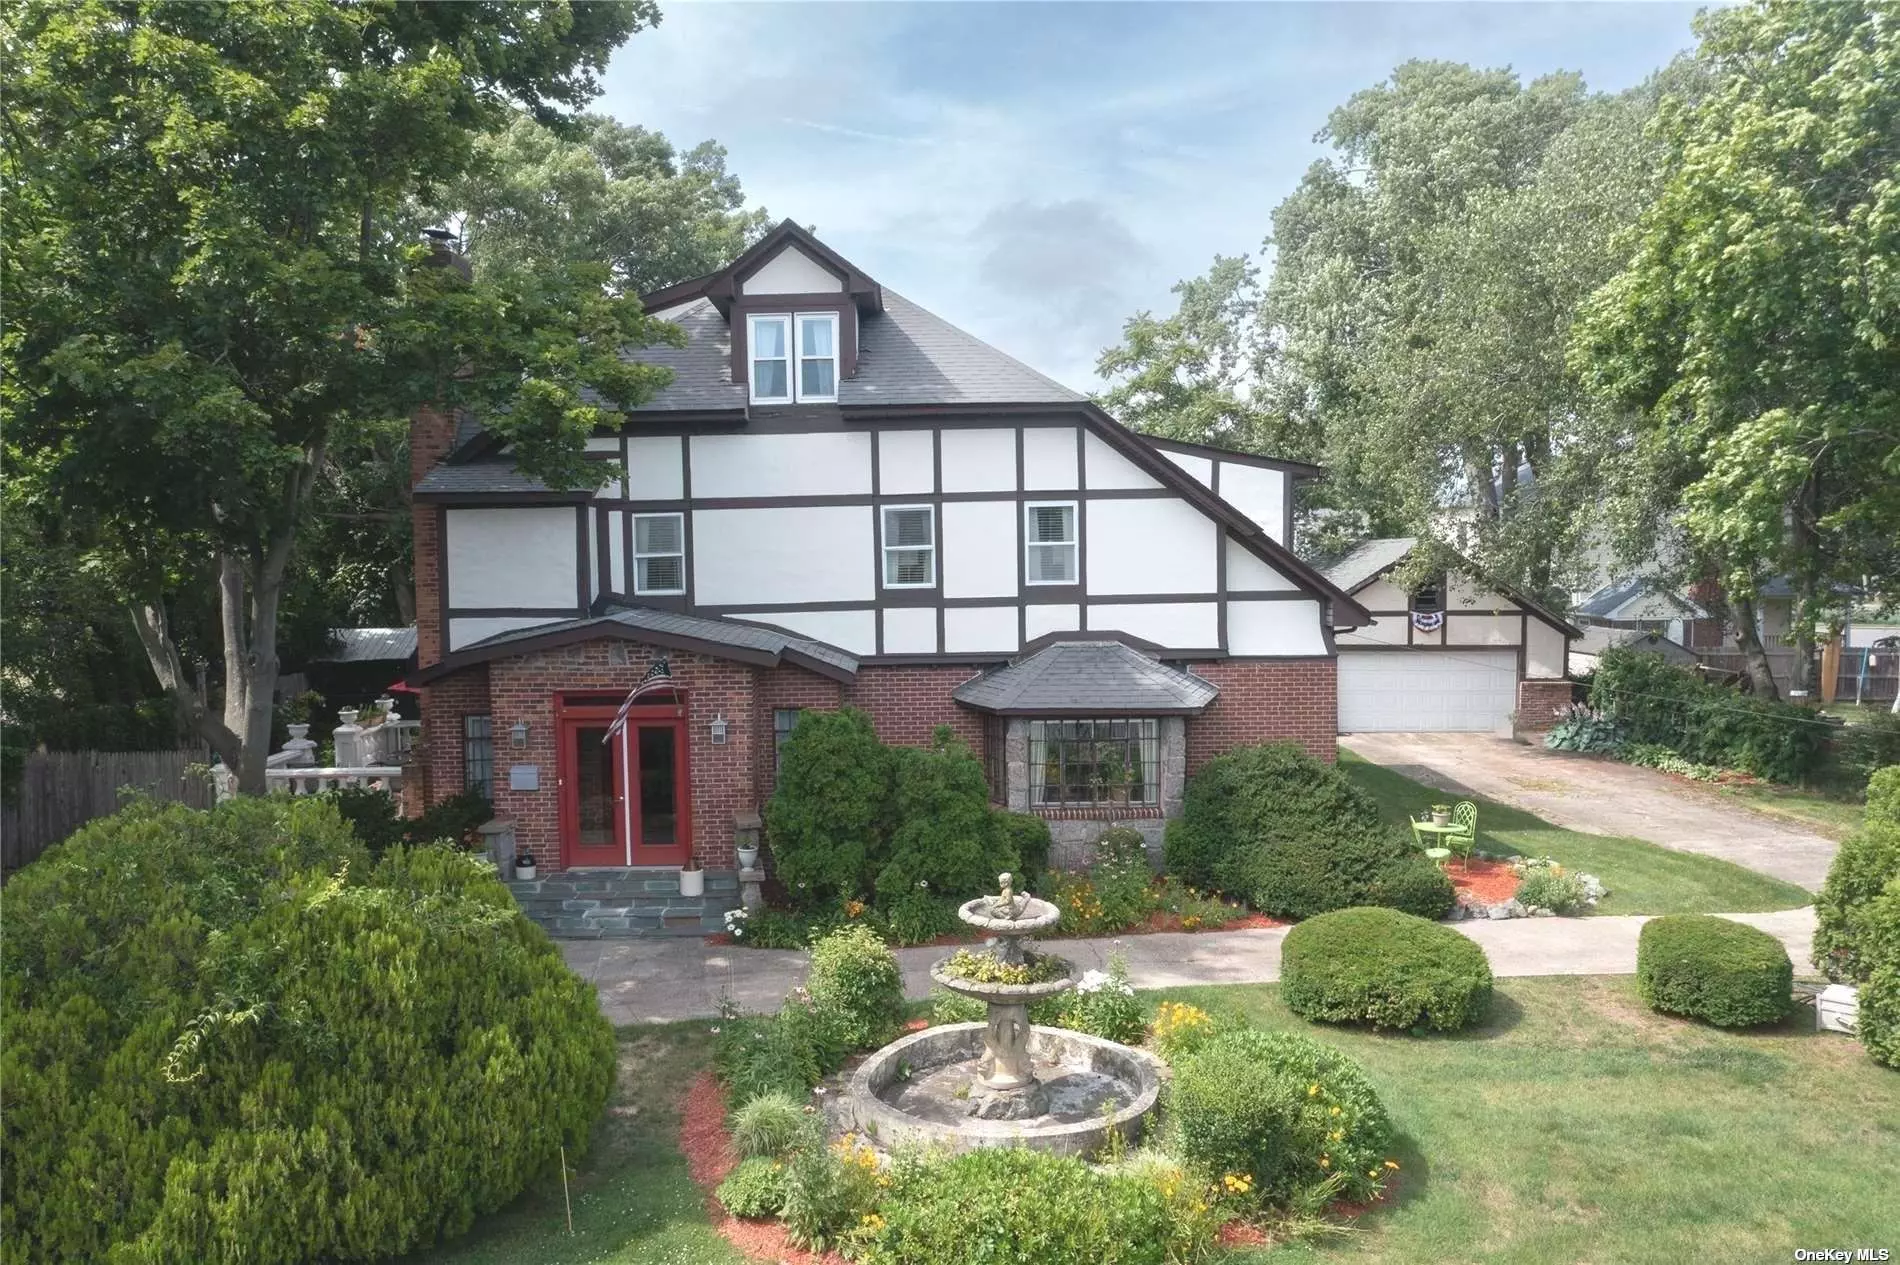 A circular driveway and beautiful manicured grounds lead you to this beautiful Tudor style home. With close to 4500 square feet of living space this gorgeous 3-level Tudor was built in the 1890&rsquo;s which was formally a part of the Arnold Estate. When entering, you are greeted by the Grand Foyer with fireplace. The main level consists of a formal living room, den, office, kitchen, formal dining room and half bath. 2nd floor has primary EnSuite w/sitting area, 3 additional bedrooms, full bath & laundry room. The finished 3rd level offers an amazing overflow of living space with a bedroom, 2nd office, playroom/ media room & full bath. Throughout the home there are welcoming spots to curl up and relax as well as quiet places to escape for work. Convenient to schools, restaurants, parks, SOHO Country Club and Golf Course, Robert Moses beaches and a ferry ride away from the Fire Island Shores!